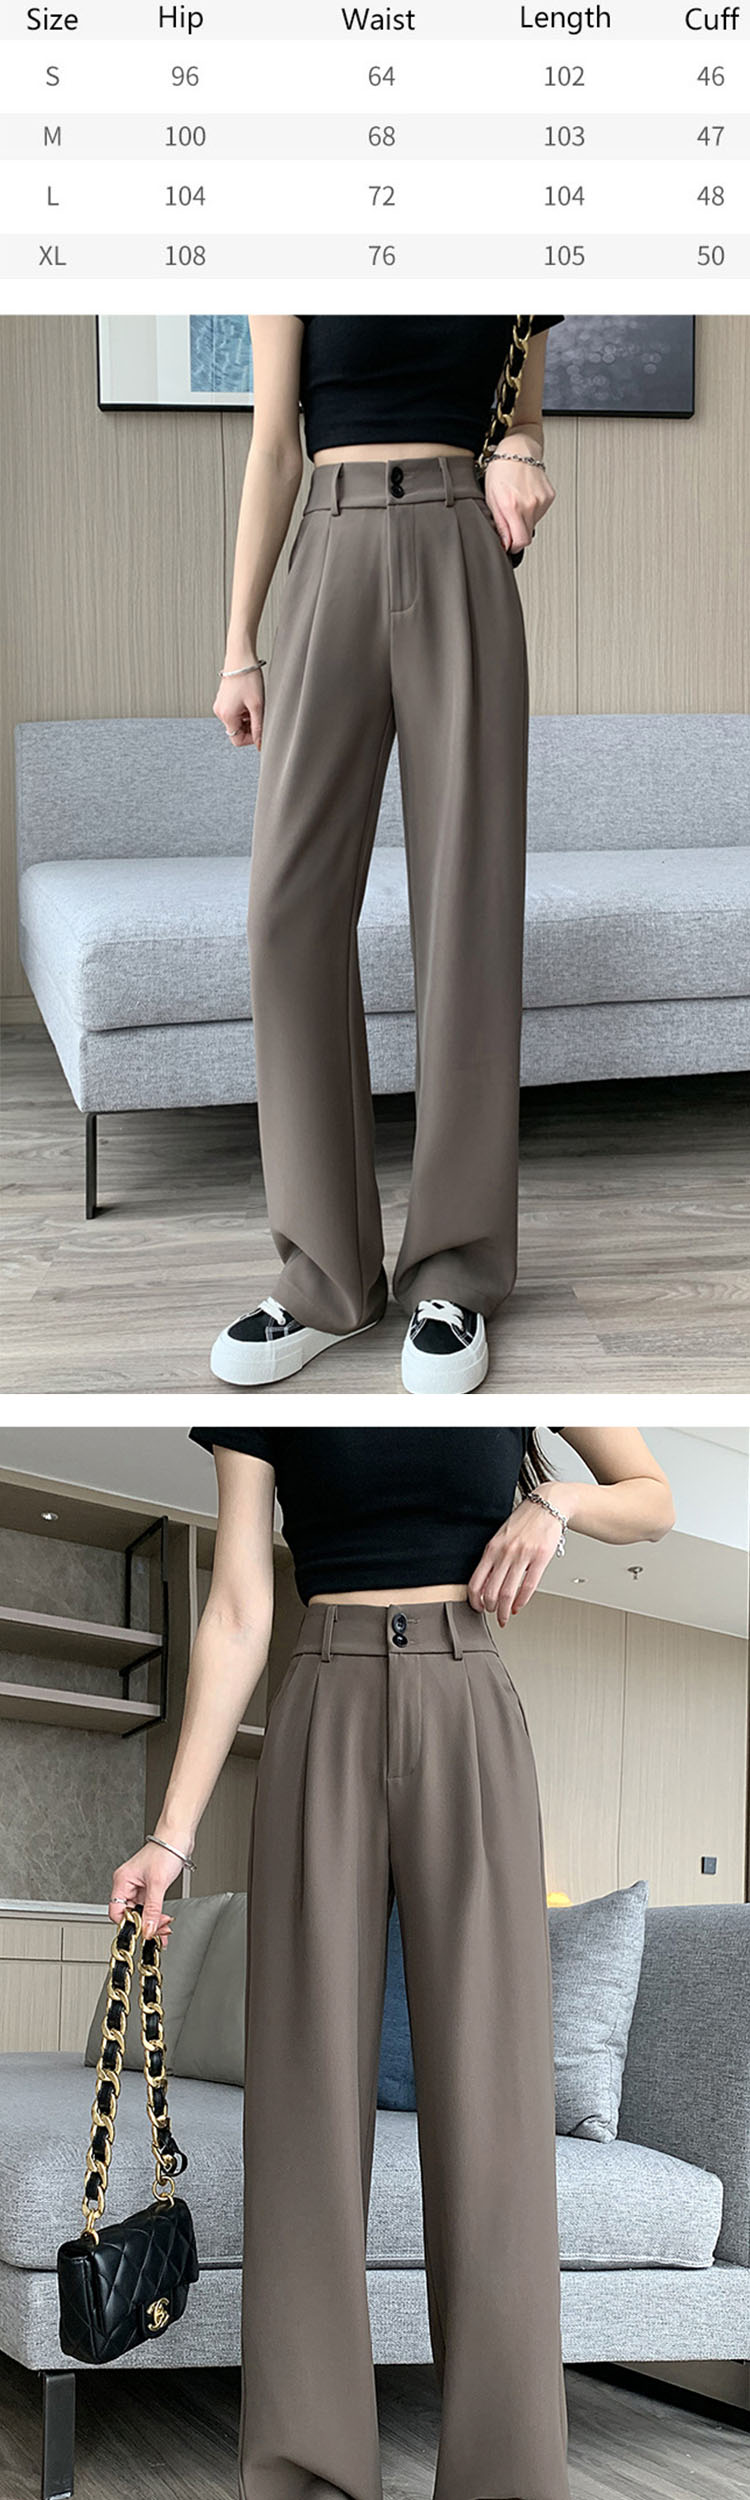 Introducing our latest women's fashion-forward high-waisted straight-leg pants